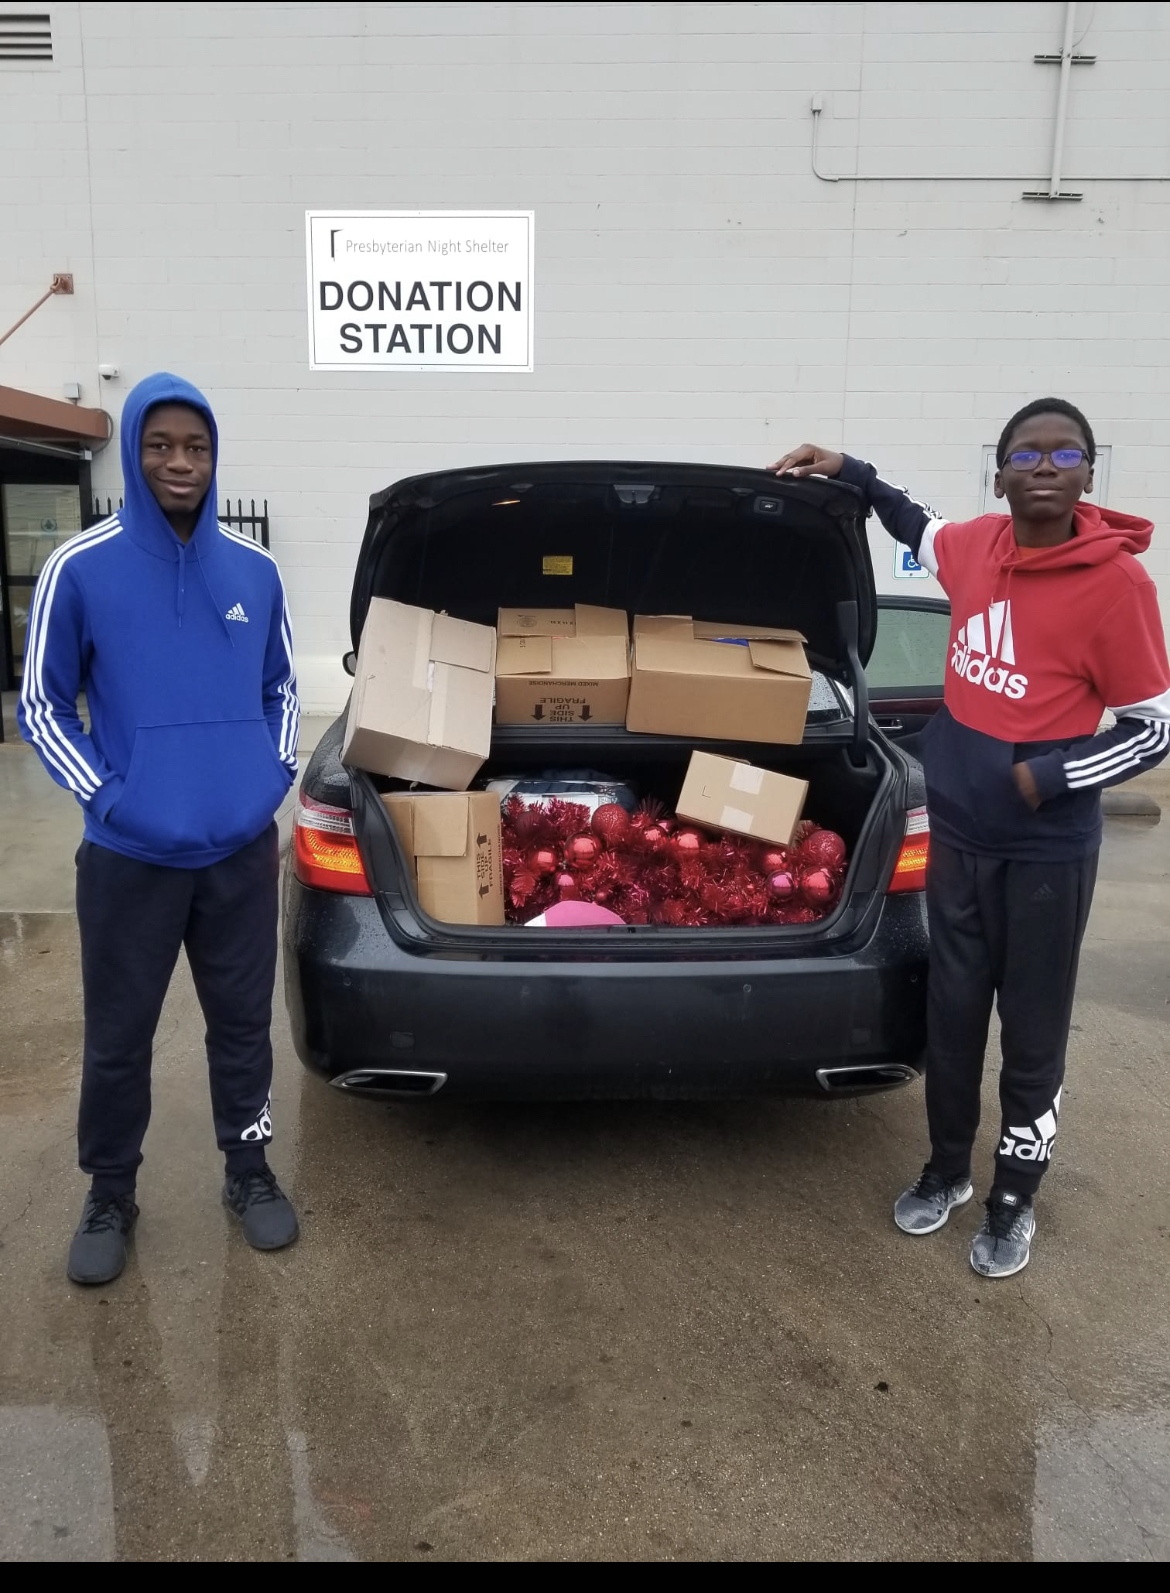 Tyrone Njelezek and brother pose with donations outside car.